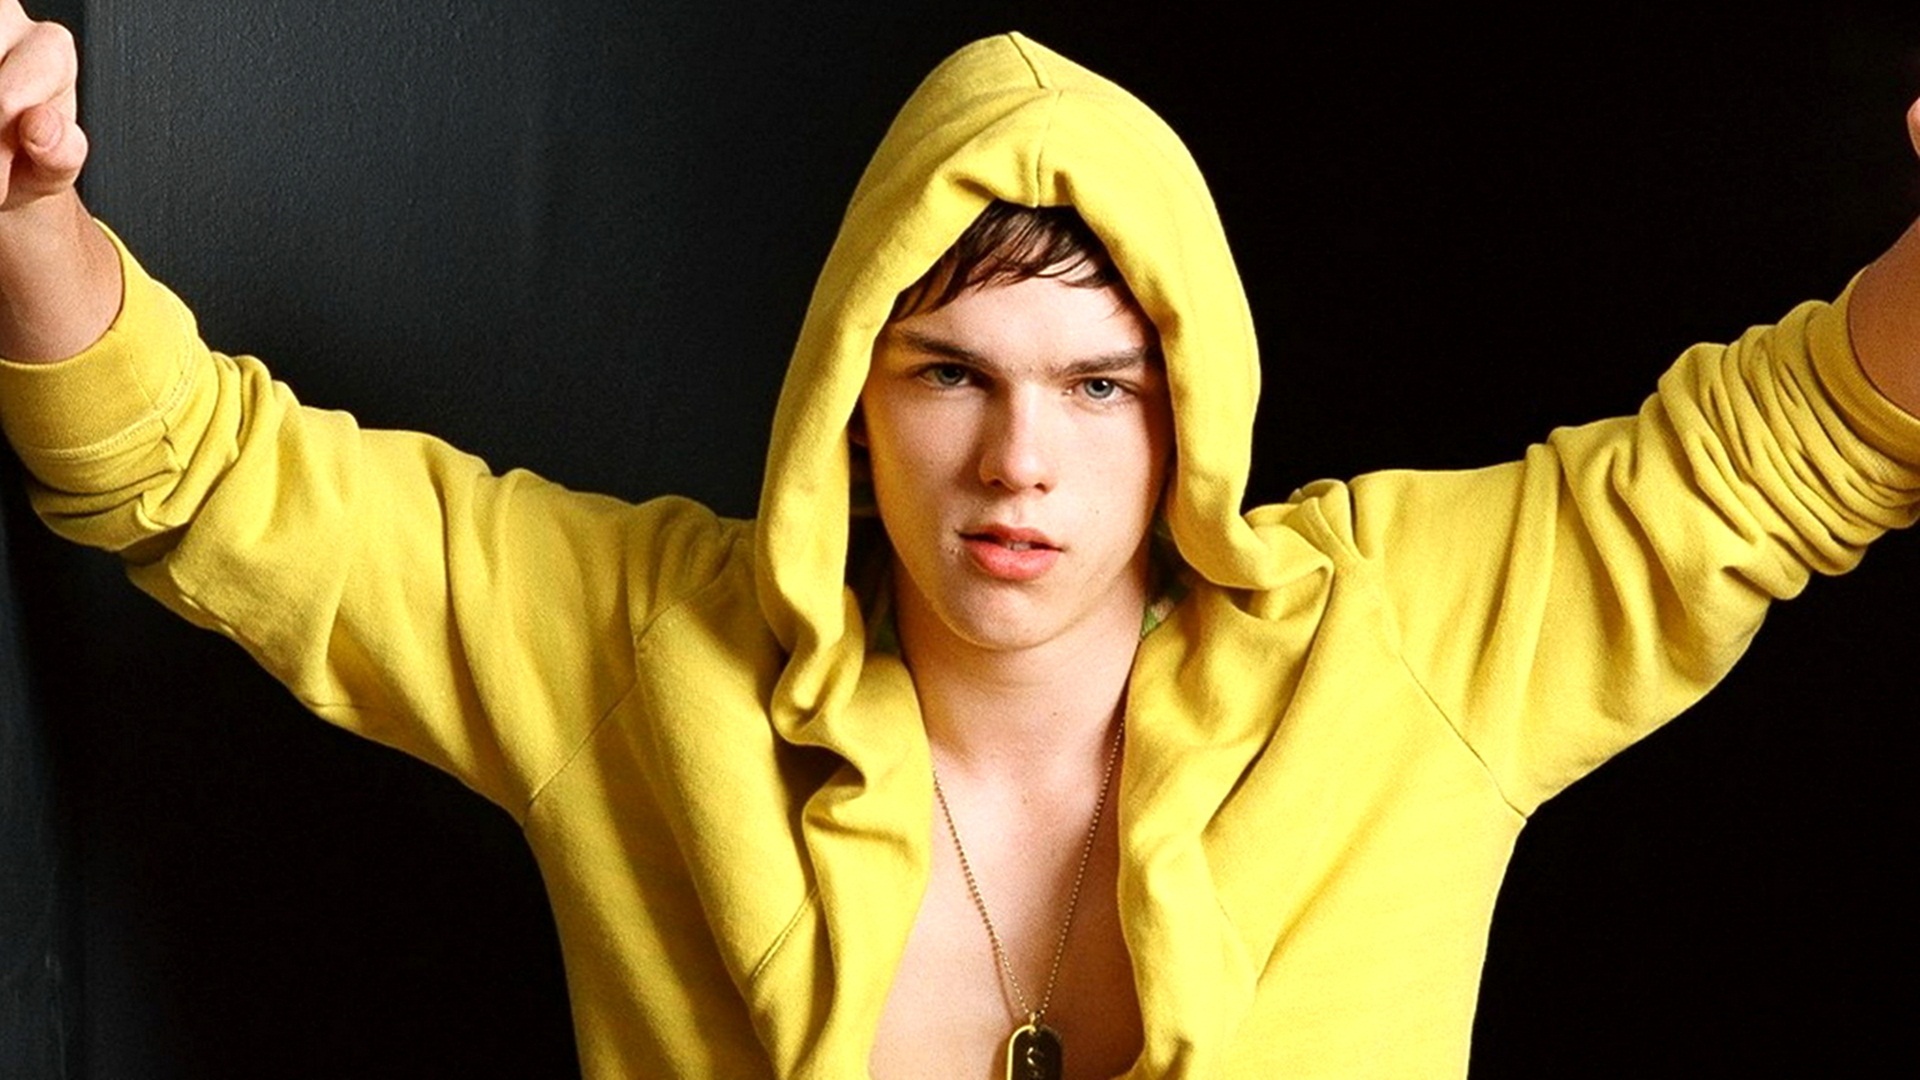 Nicholas Hoult Background Wallpapers.